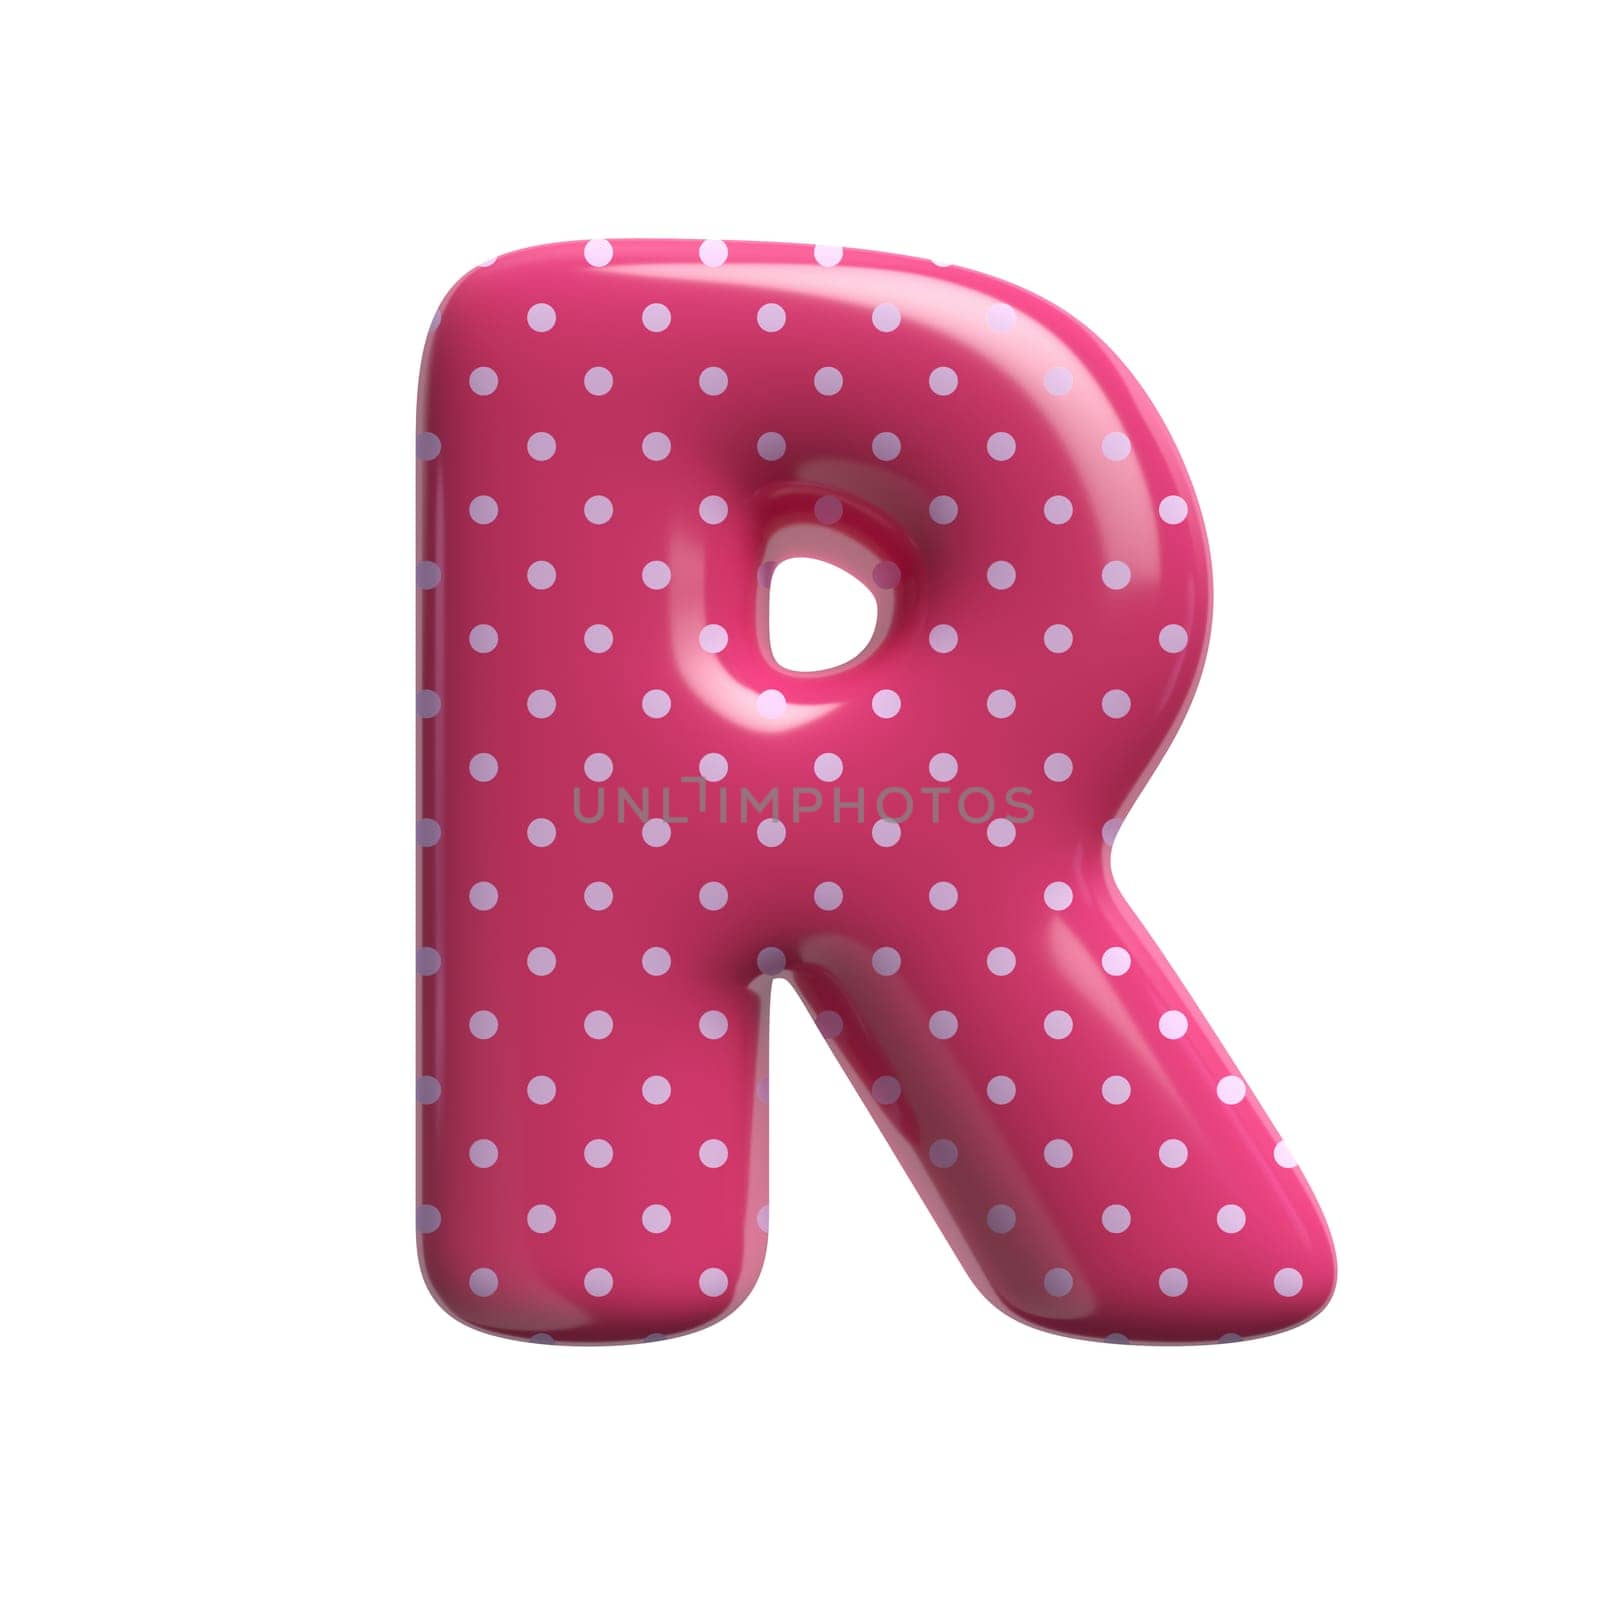 Polka dot letter R - Capital 3d pink retro font isolated on white background. This alphabet is perfect for creative illustrations related but not limited to Fashion, retro design, decoration...